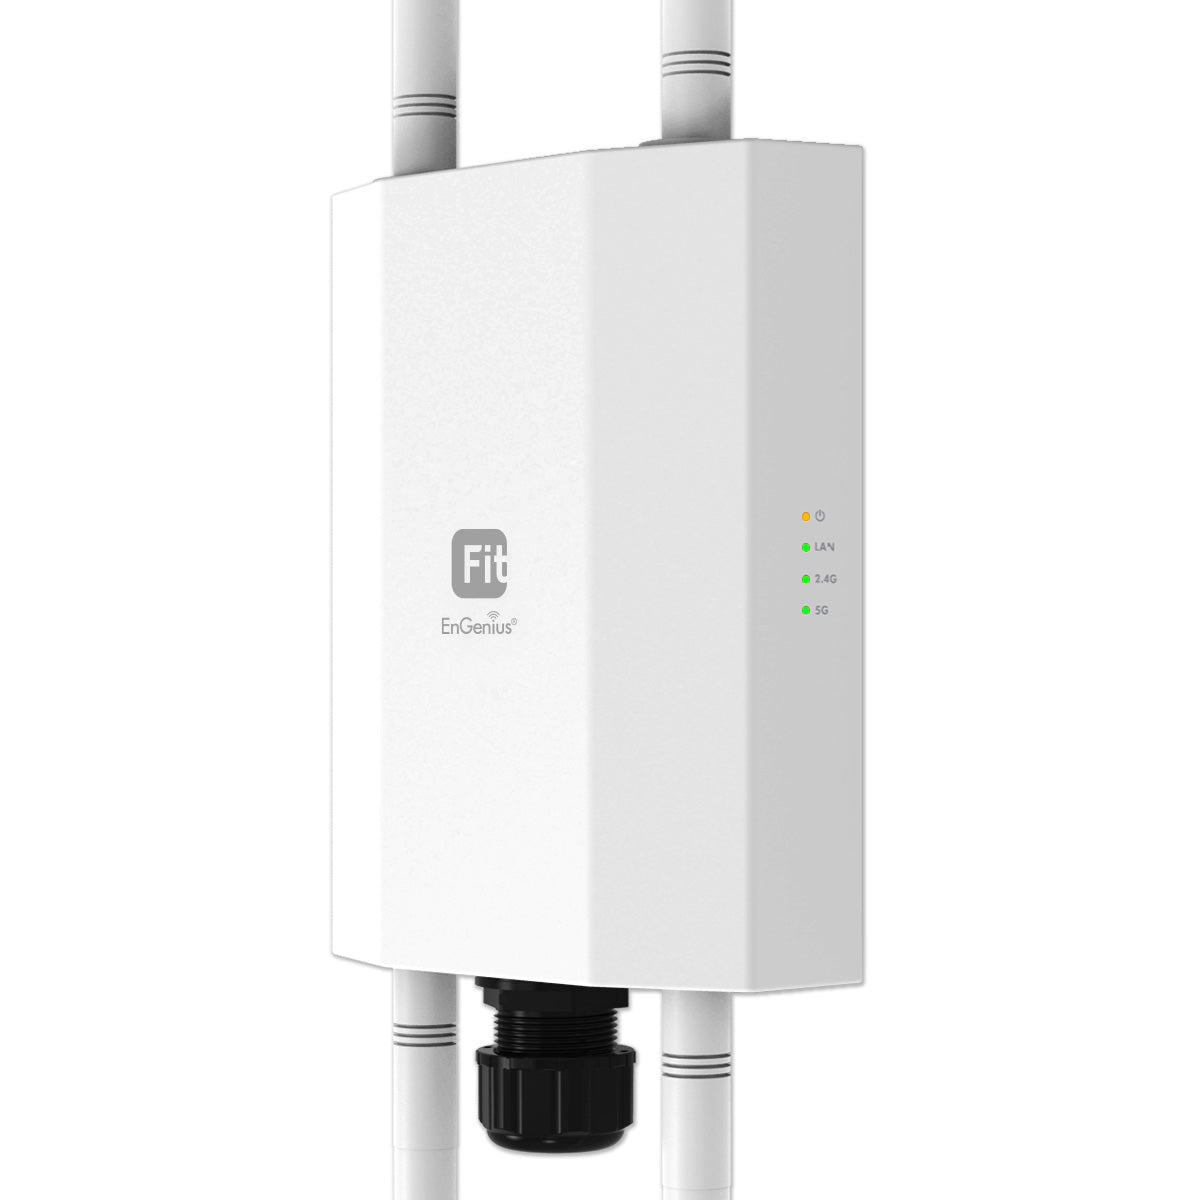 EWS850-FIT: EnGenius Fit Wi-Fi 6 2×2 Outdoor Wireless Access Point